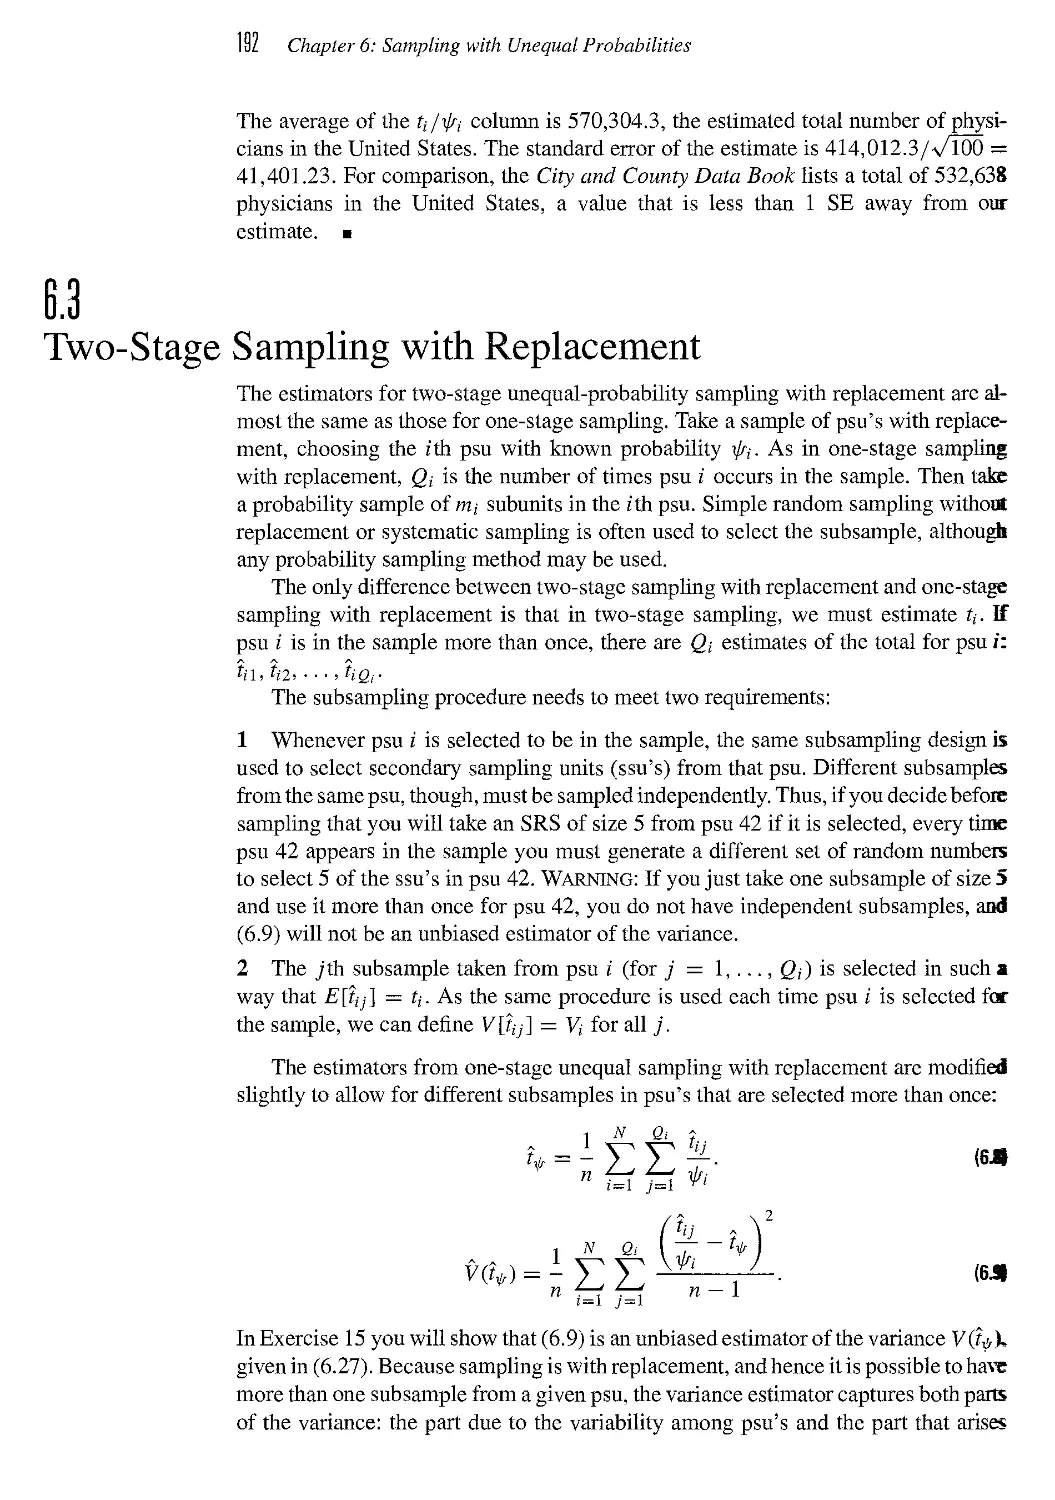 6.3 Two-Stage Sampling with Replacement